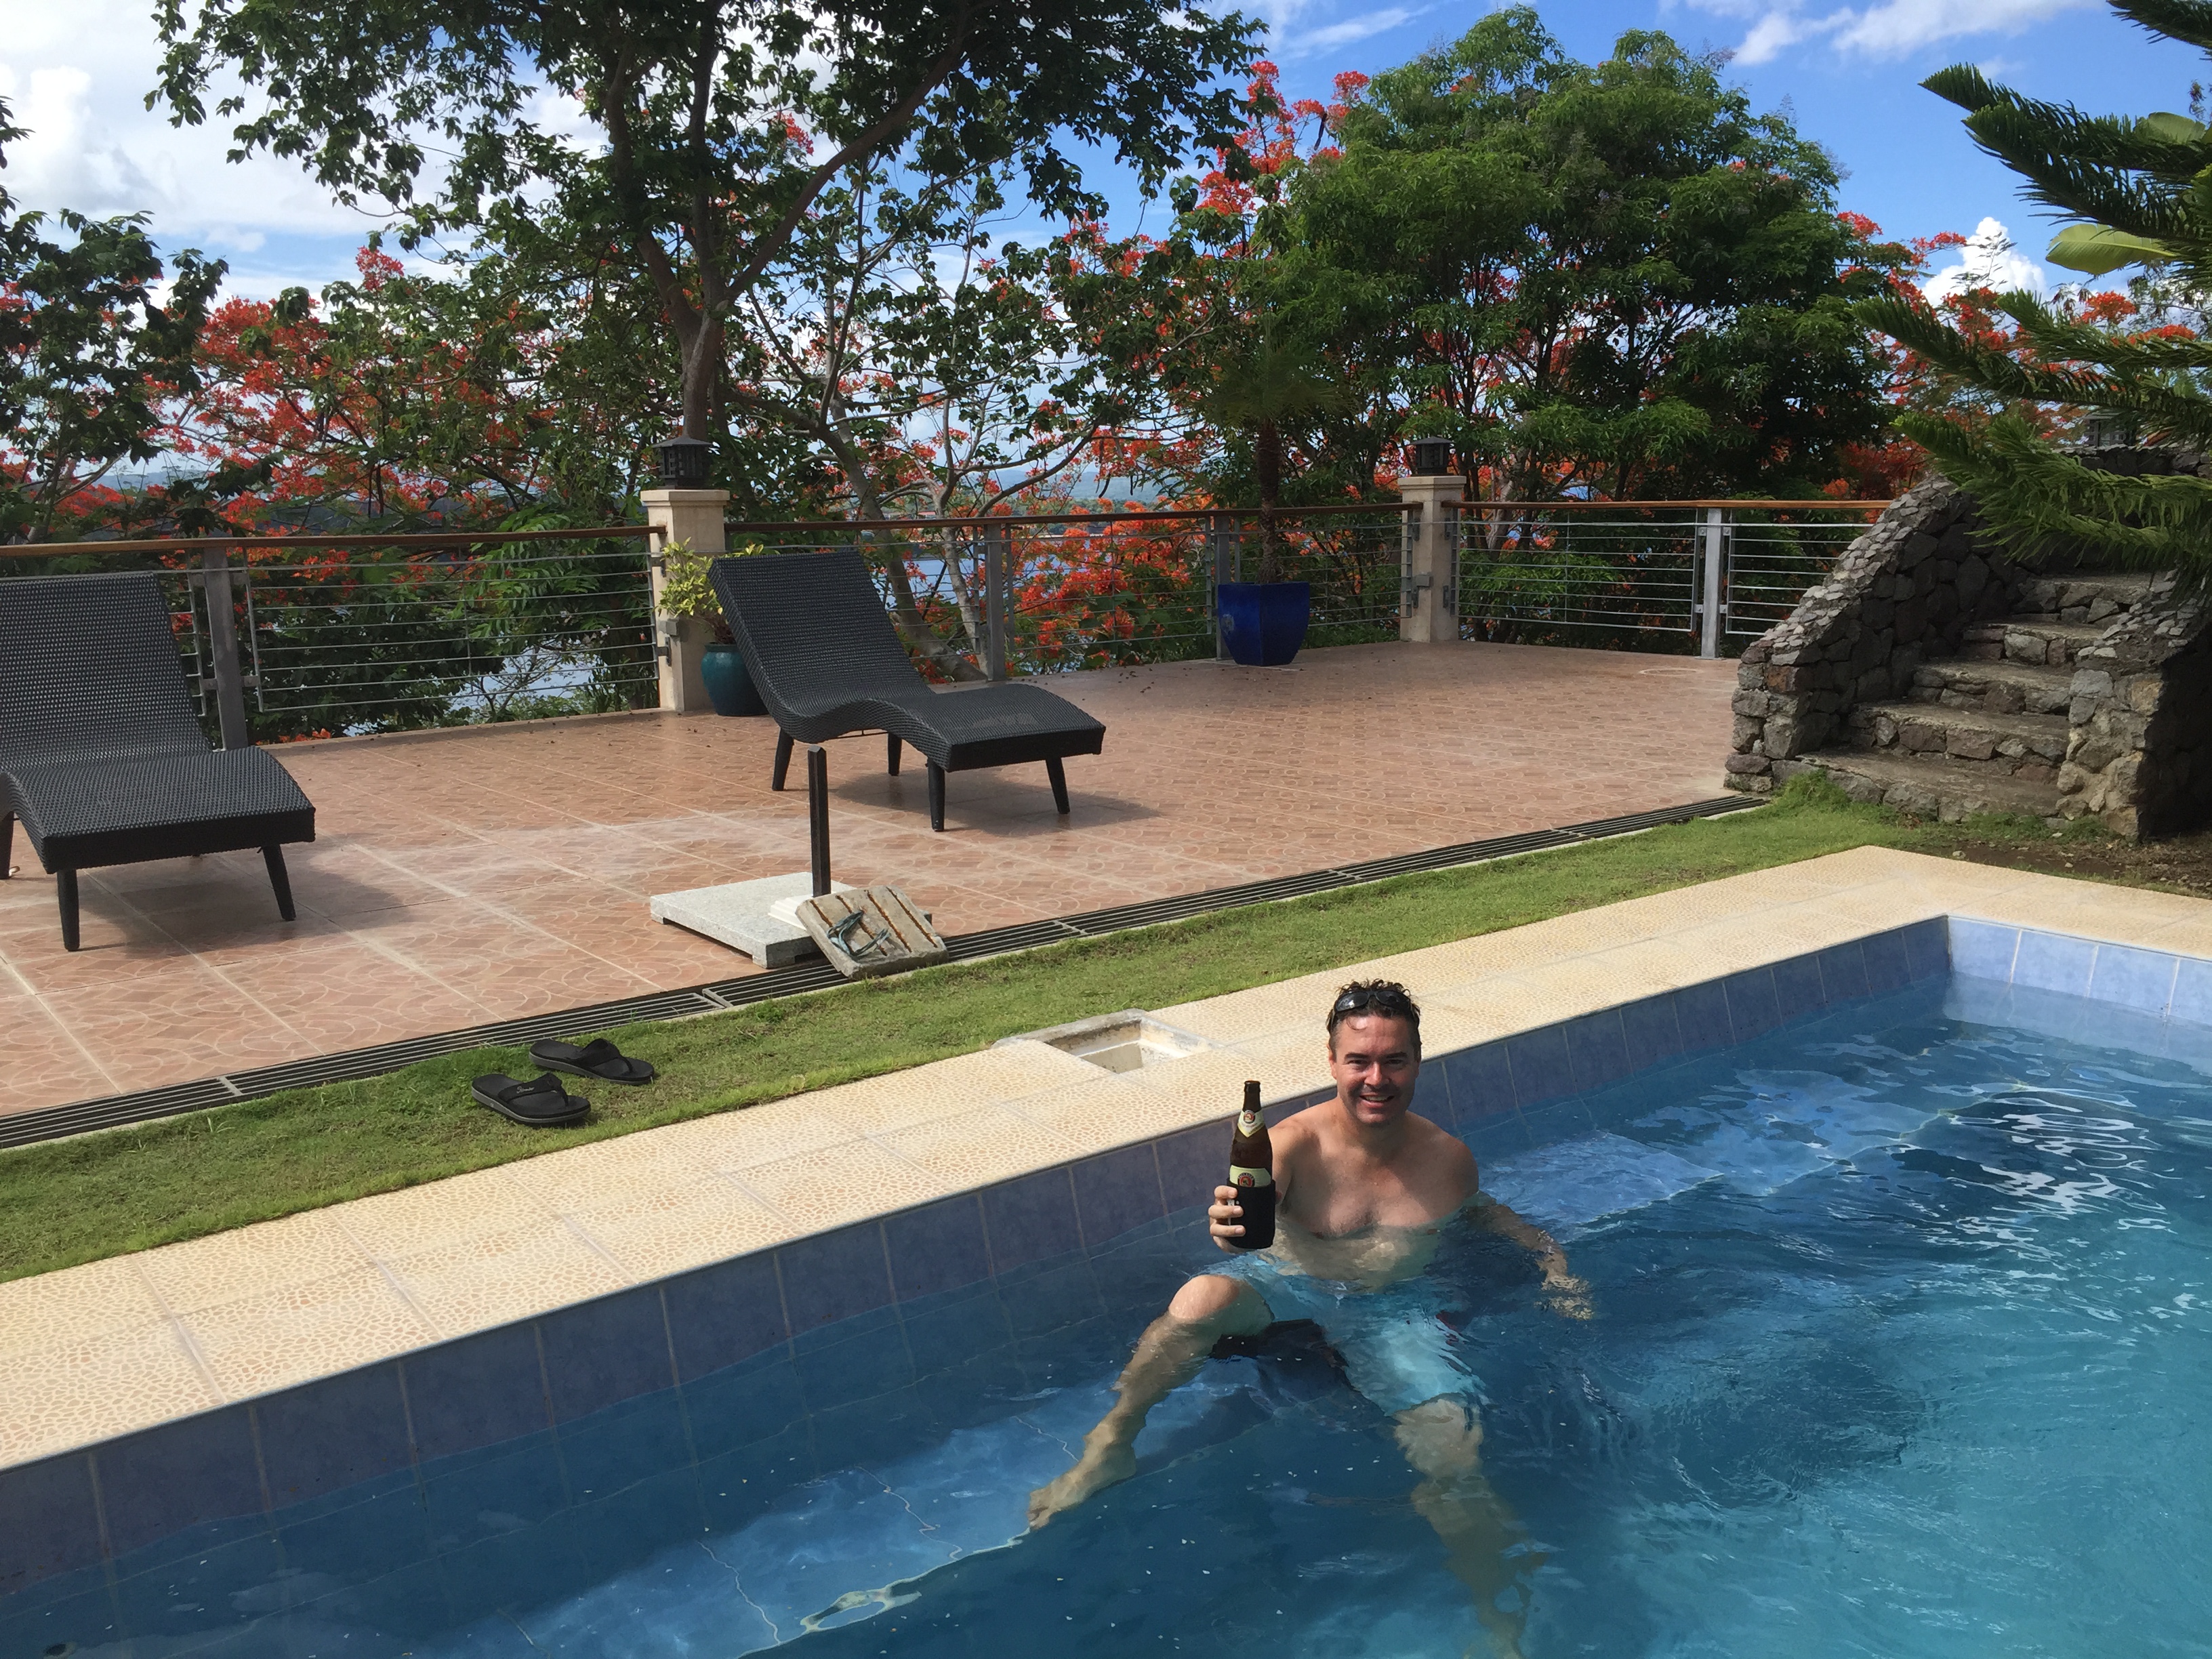 Relaxing in the pool with amazing views in Maya Maya